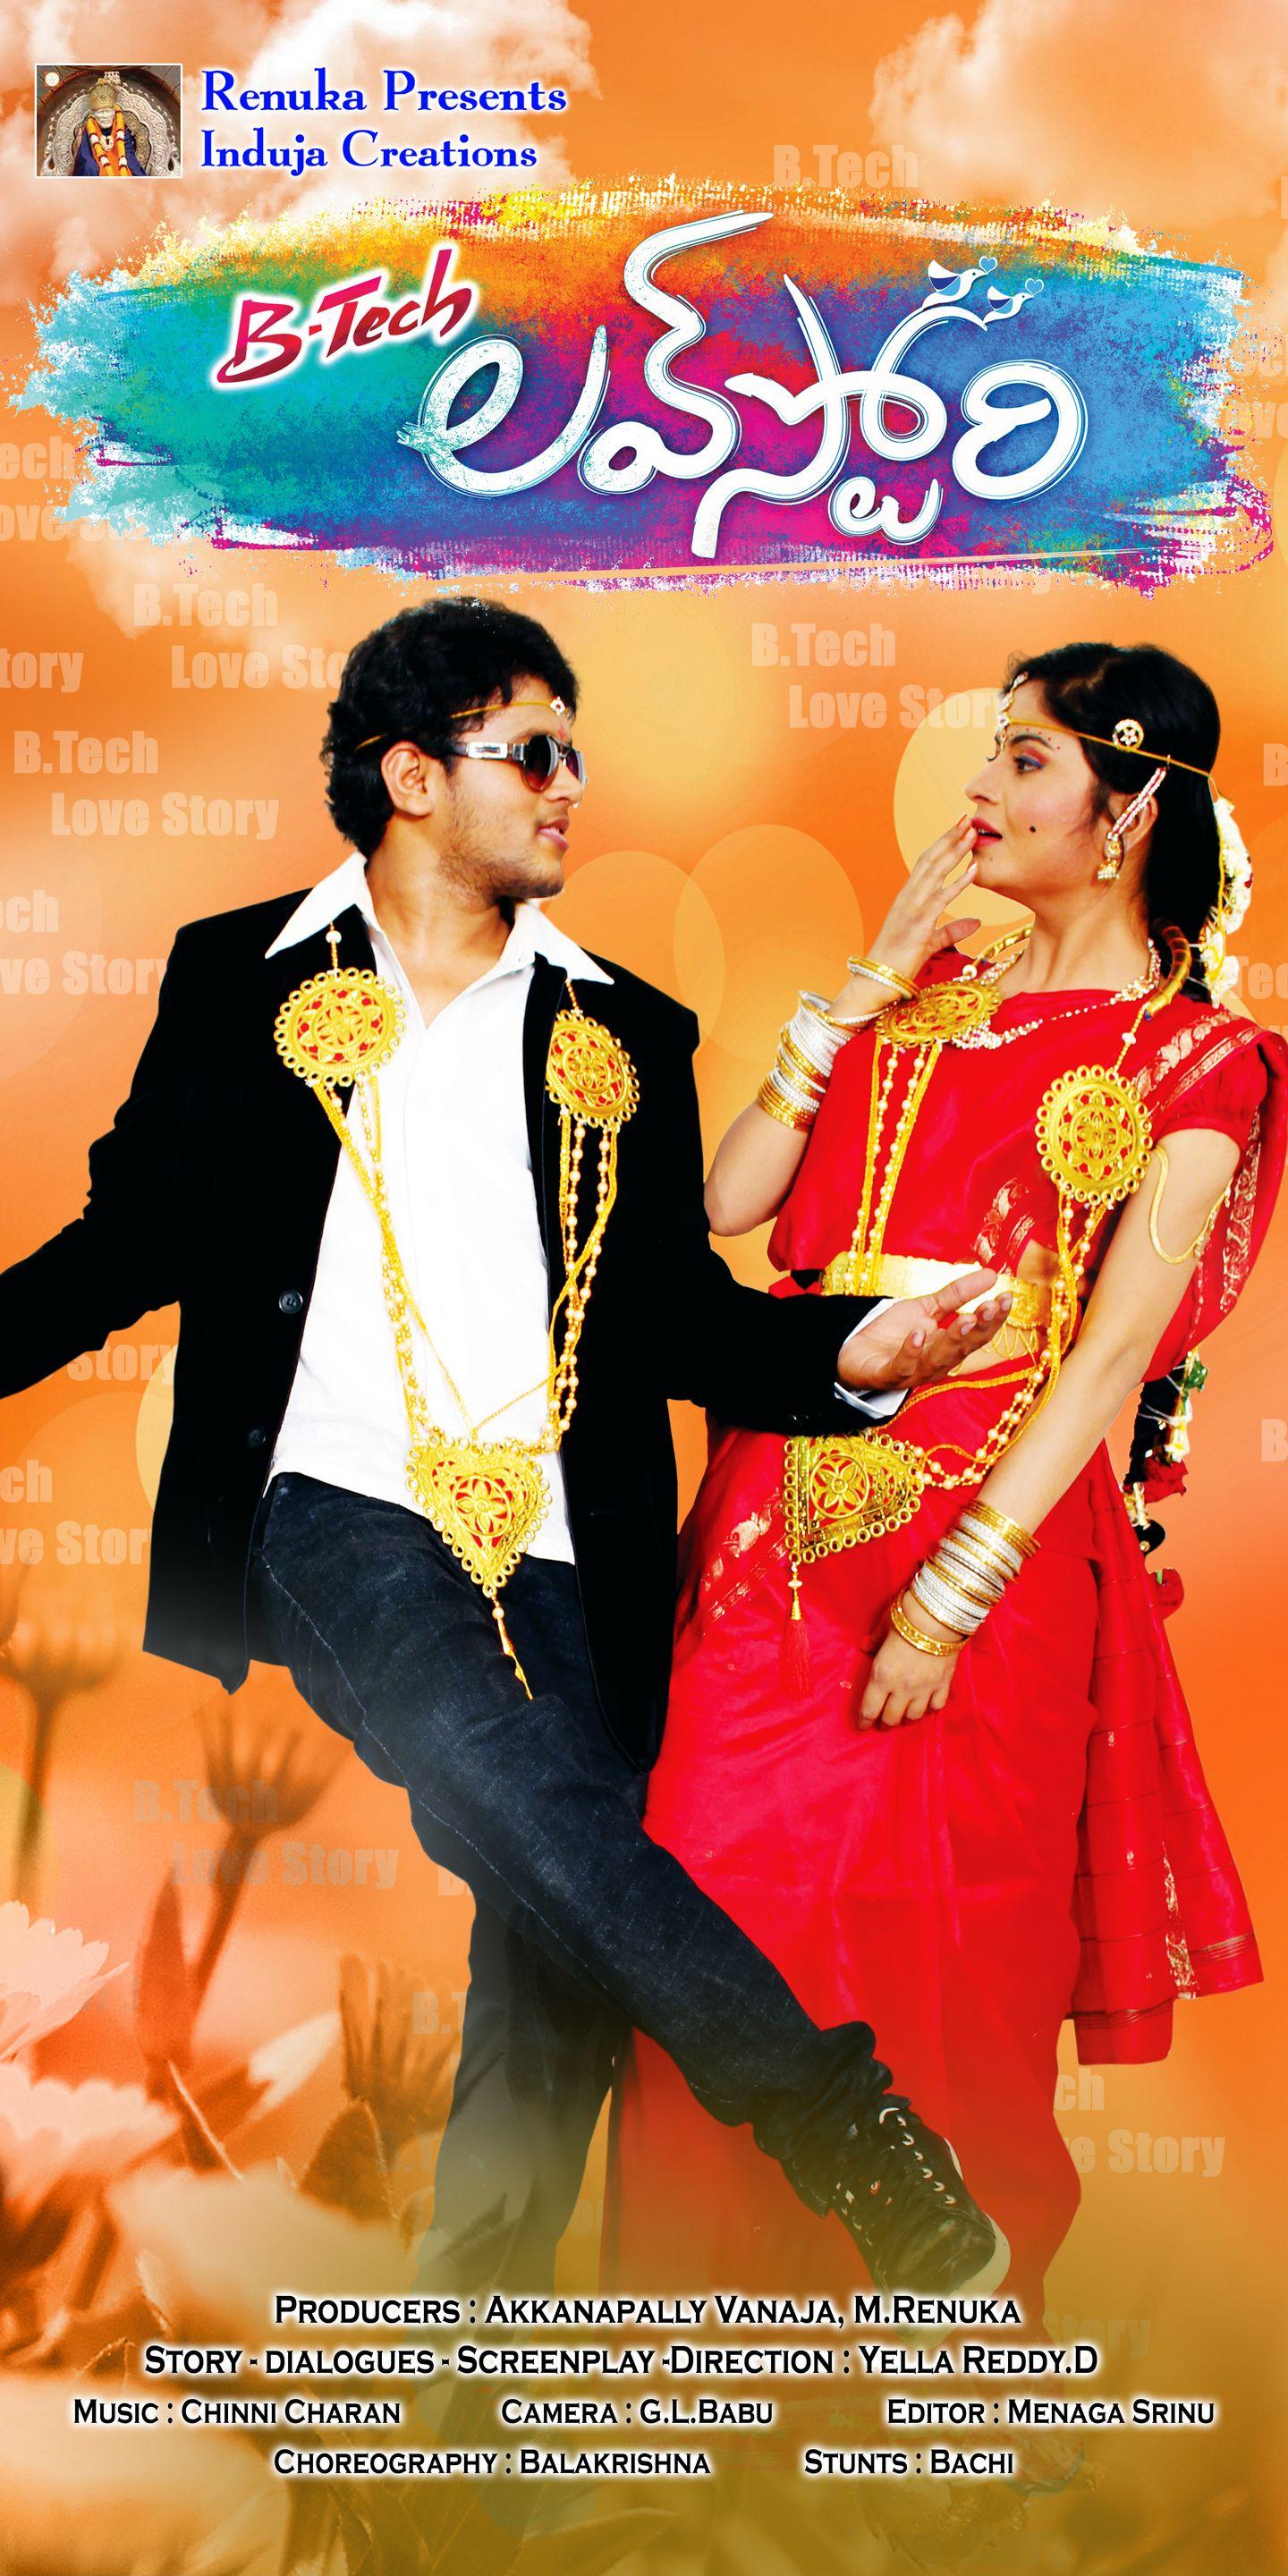 B.tech Love Story Movie Posters